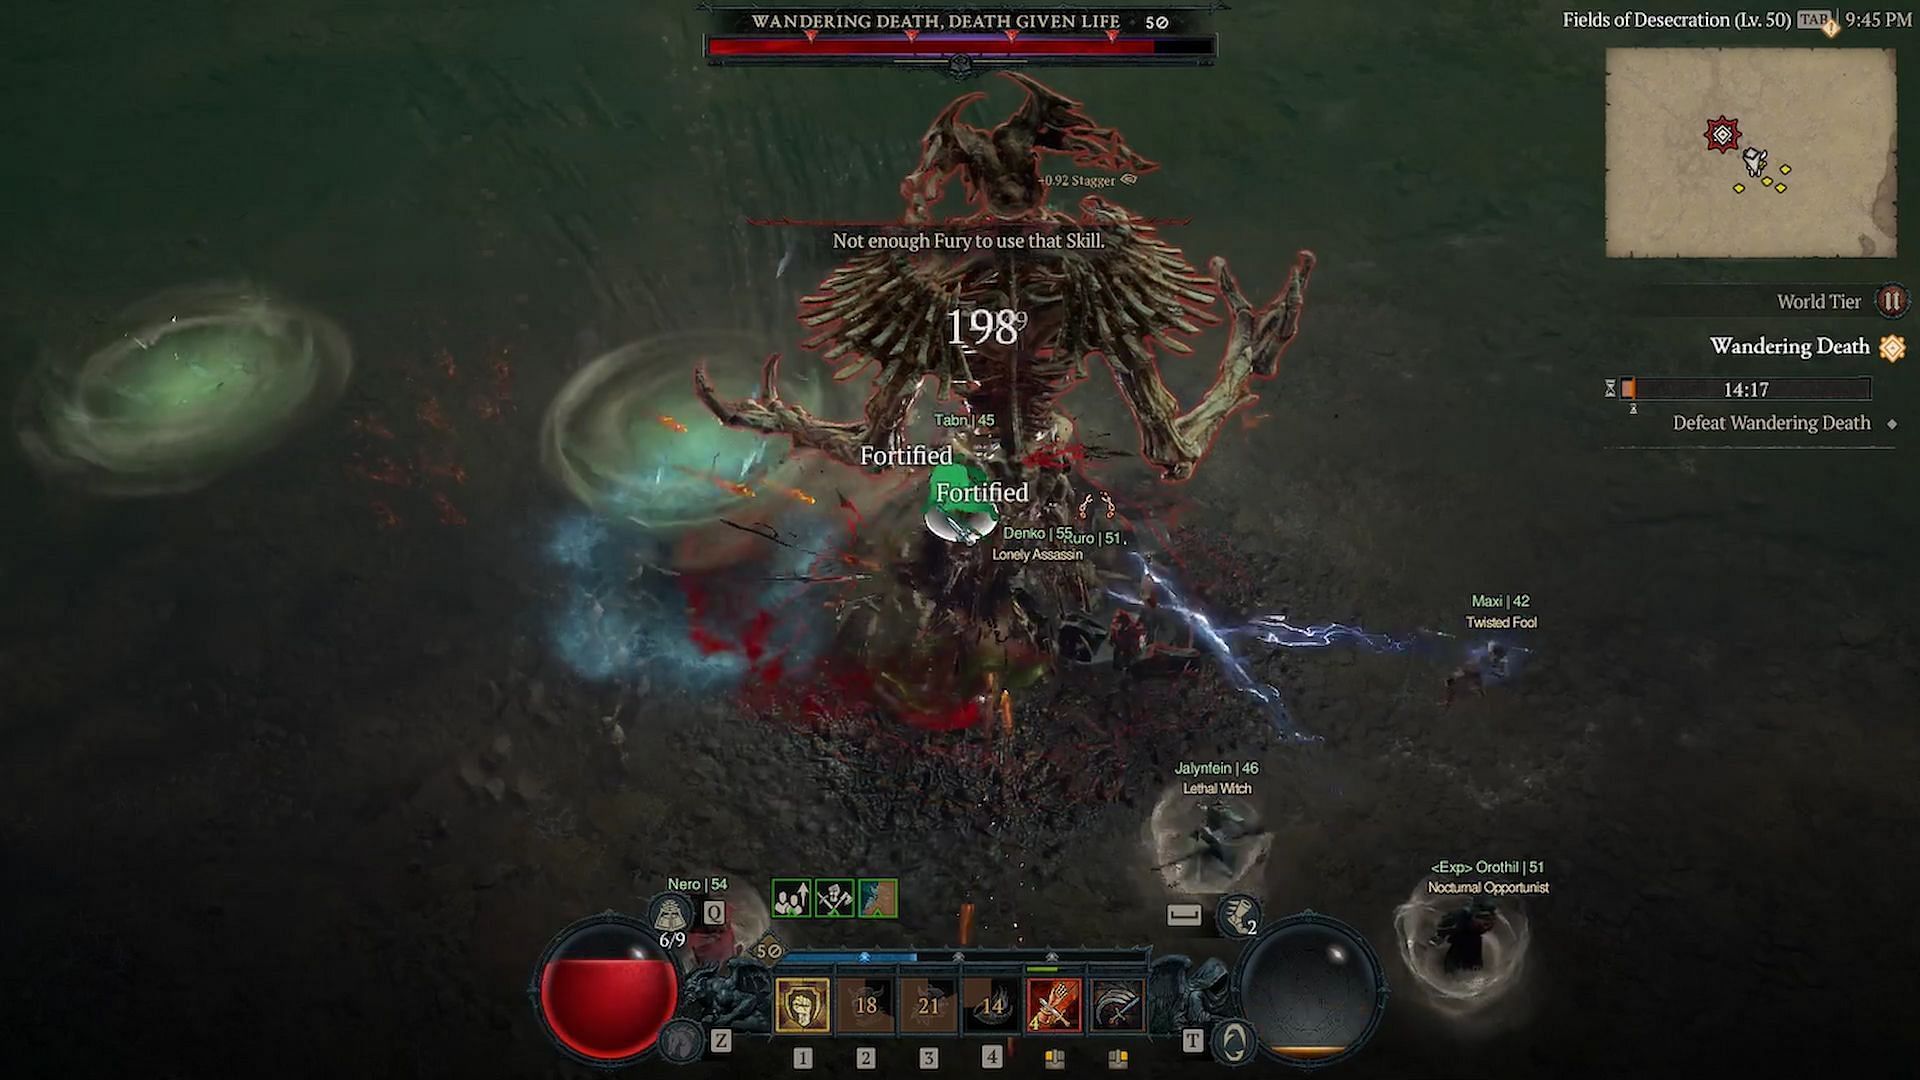 The Wandering Death is one of the toughest Bosses to kill in Diablo 4 (Image via Blizzard)